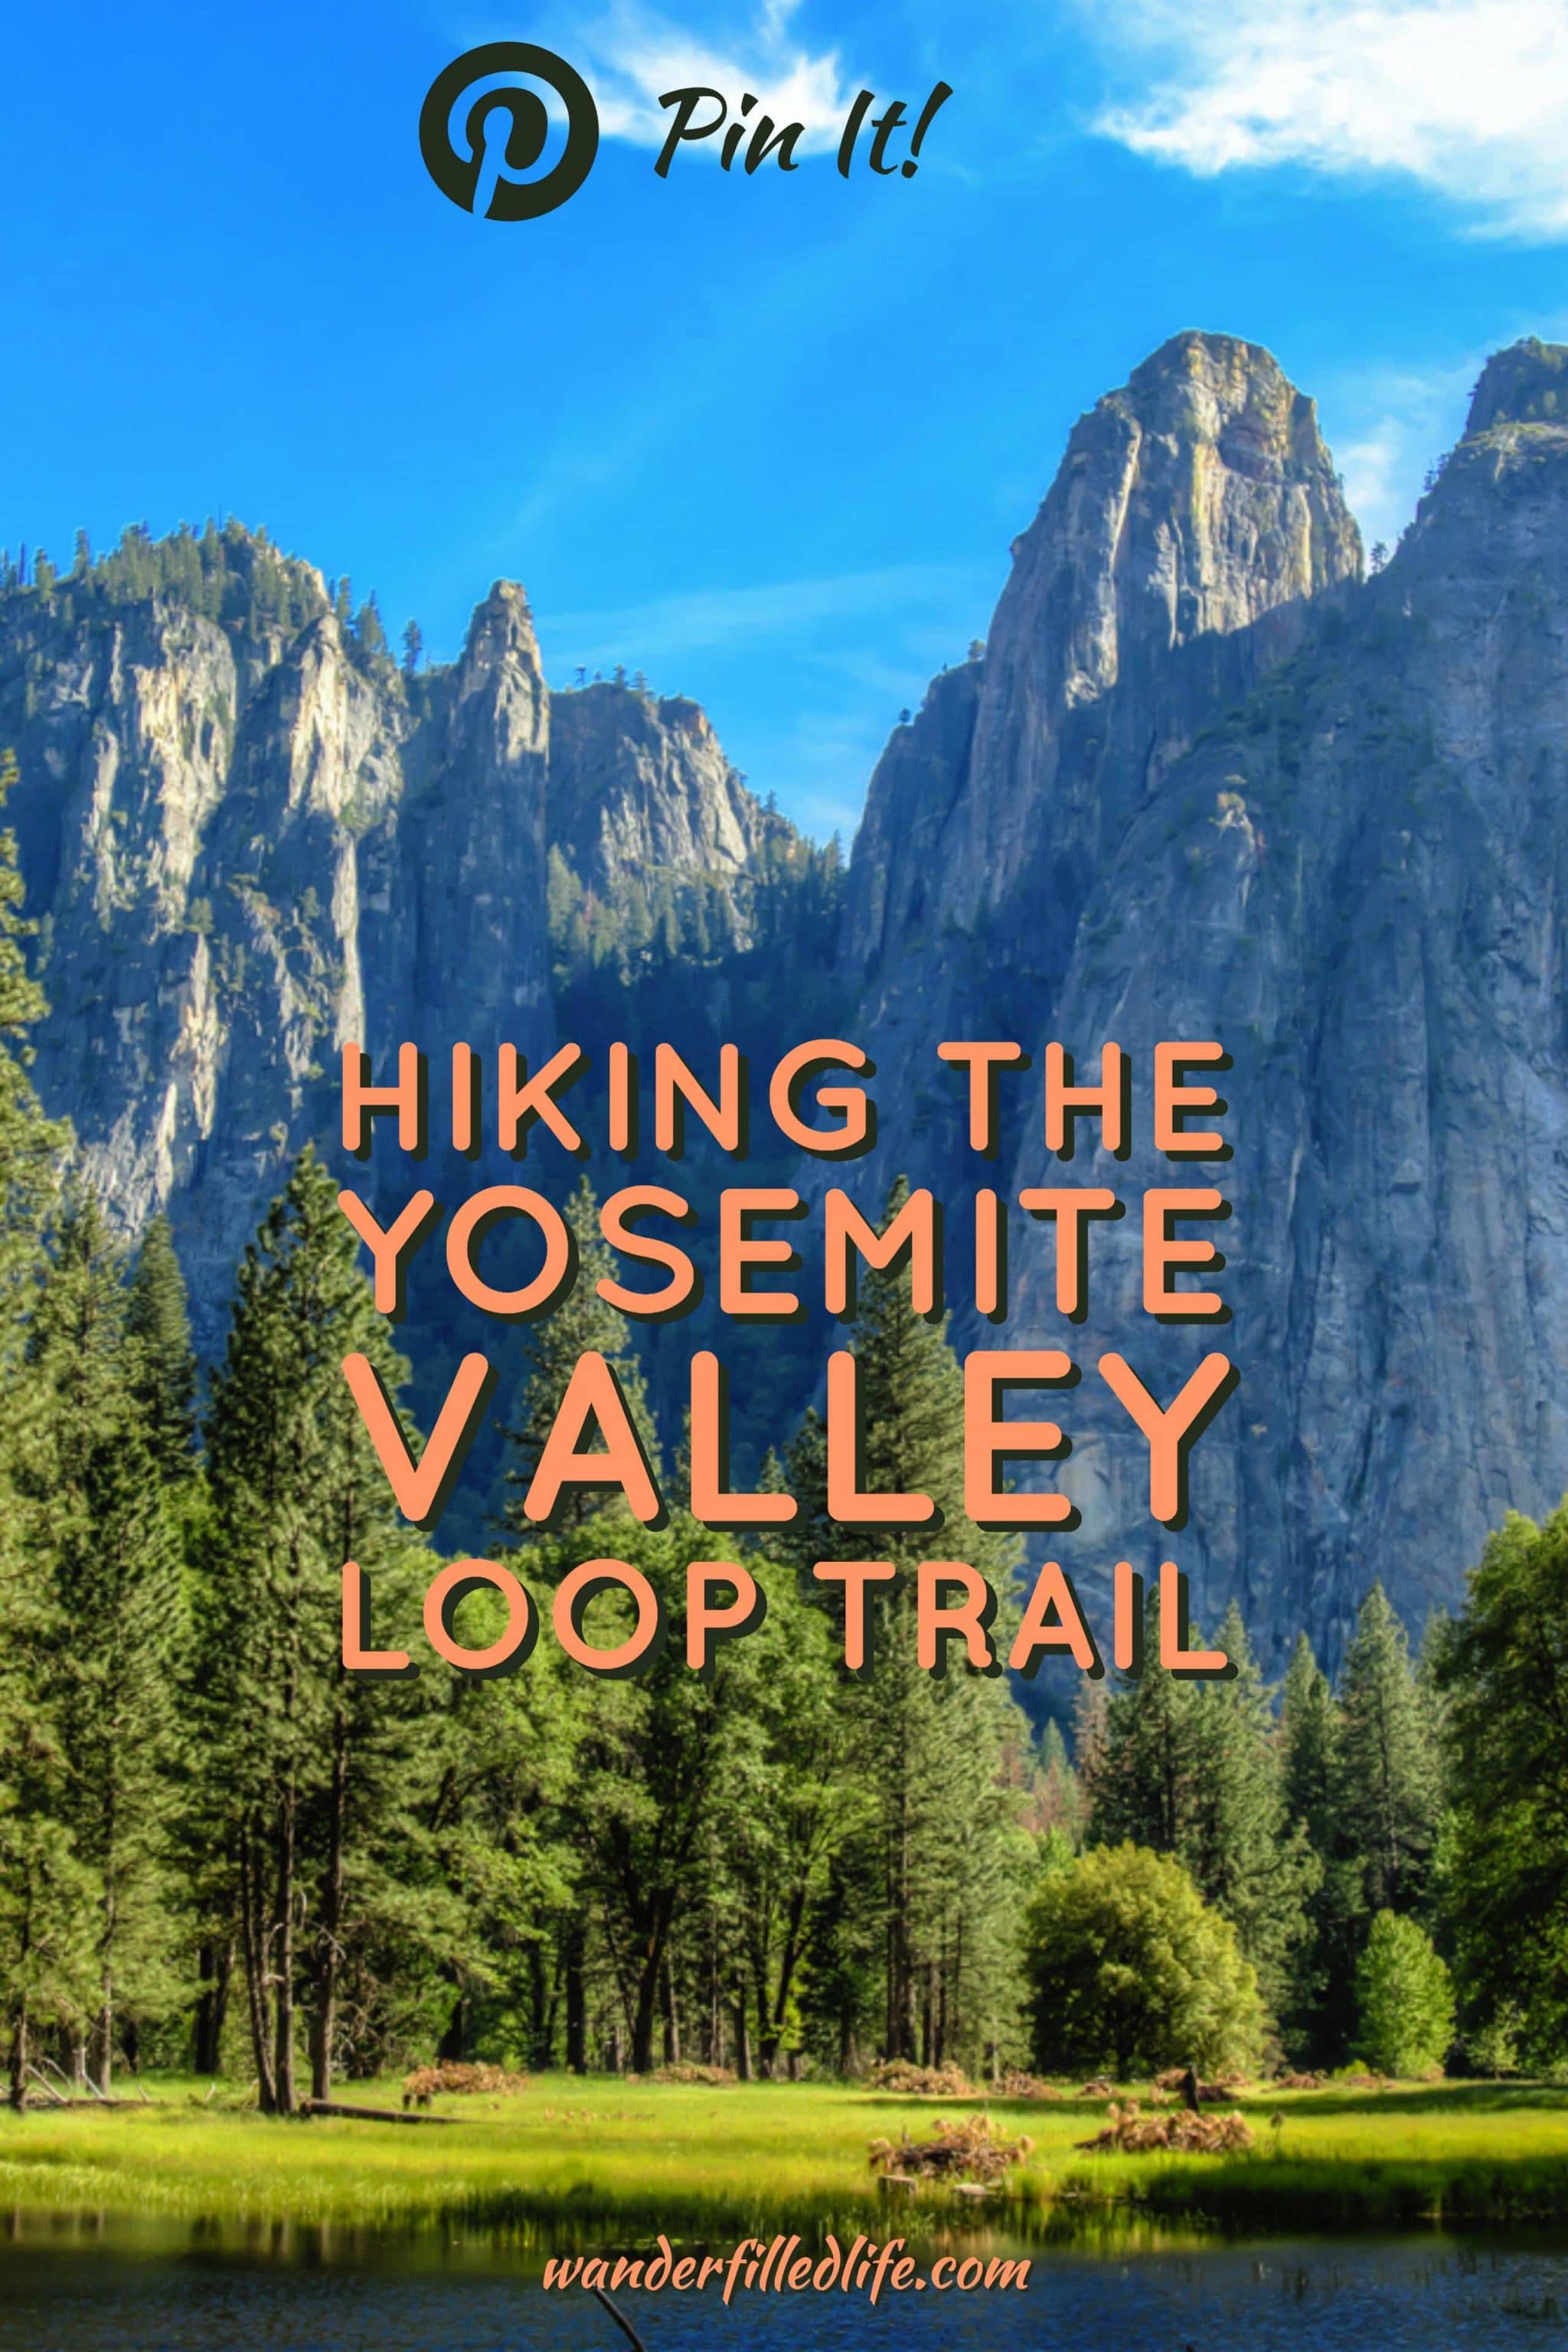 A review of our hike along the Yosemite Valley Loop Trail, including Yosemite Falls and Mirror Lake. See the best of Yosemite Valley in one big loop!